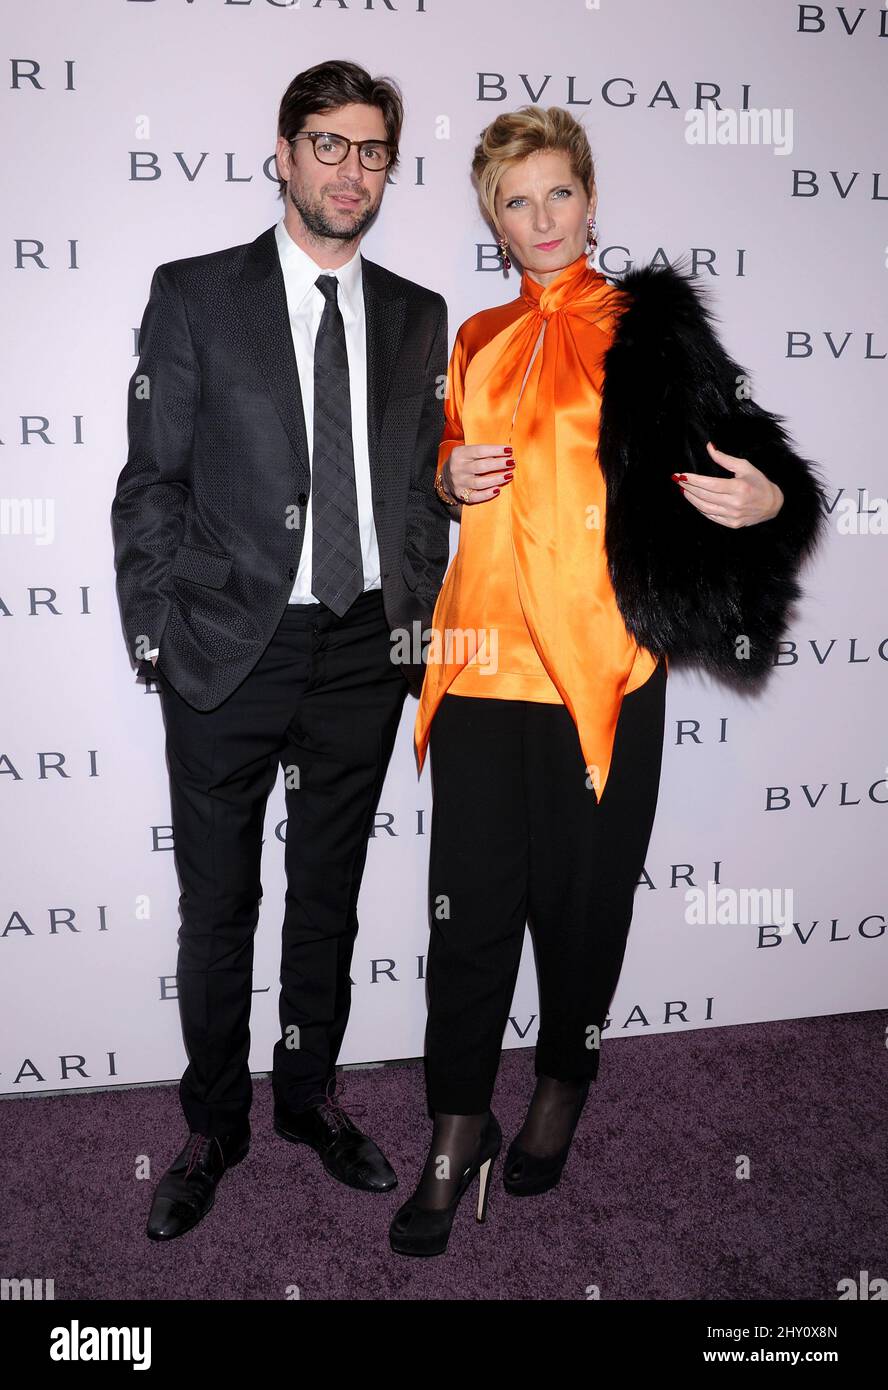 Gale Harold and Sabina Belli attending a photocall for a exhibition of Elizabeth Taylor's Bvlgari jewellery in Beverly Hills, California. Stock Photo